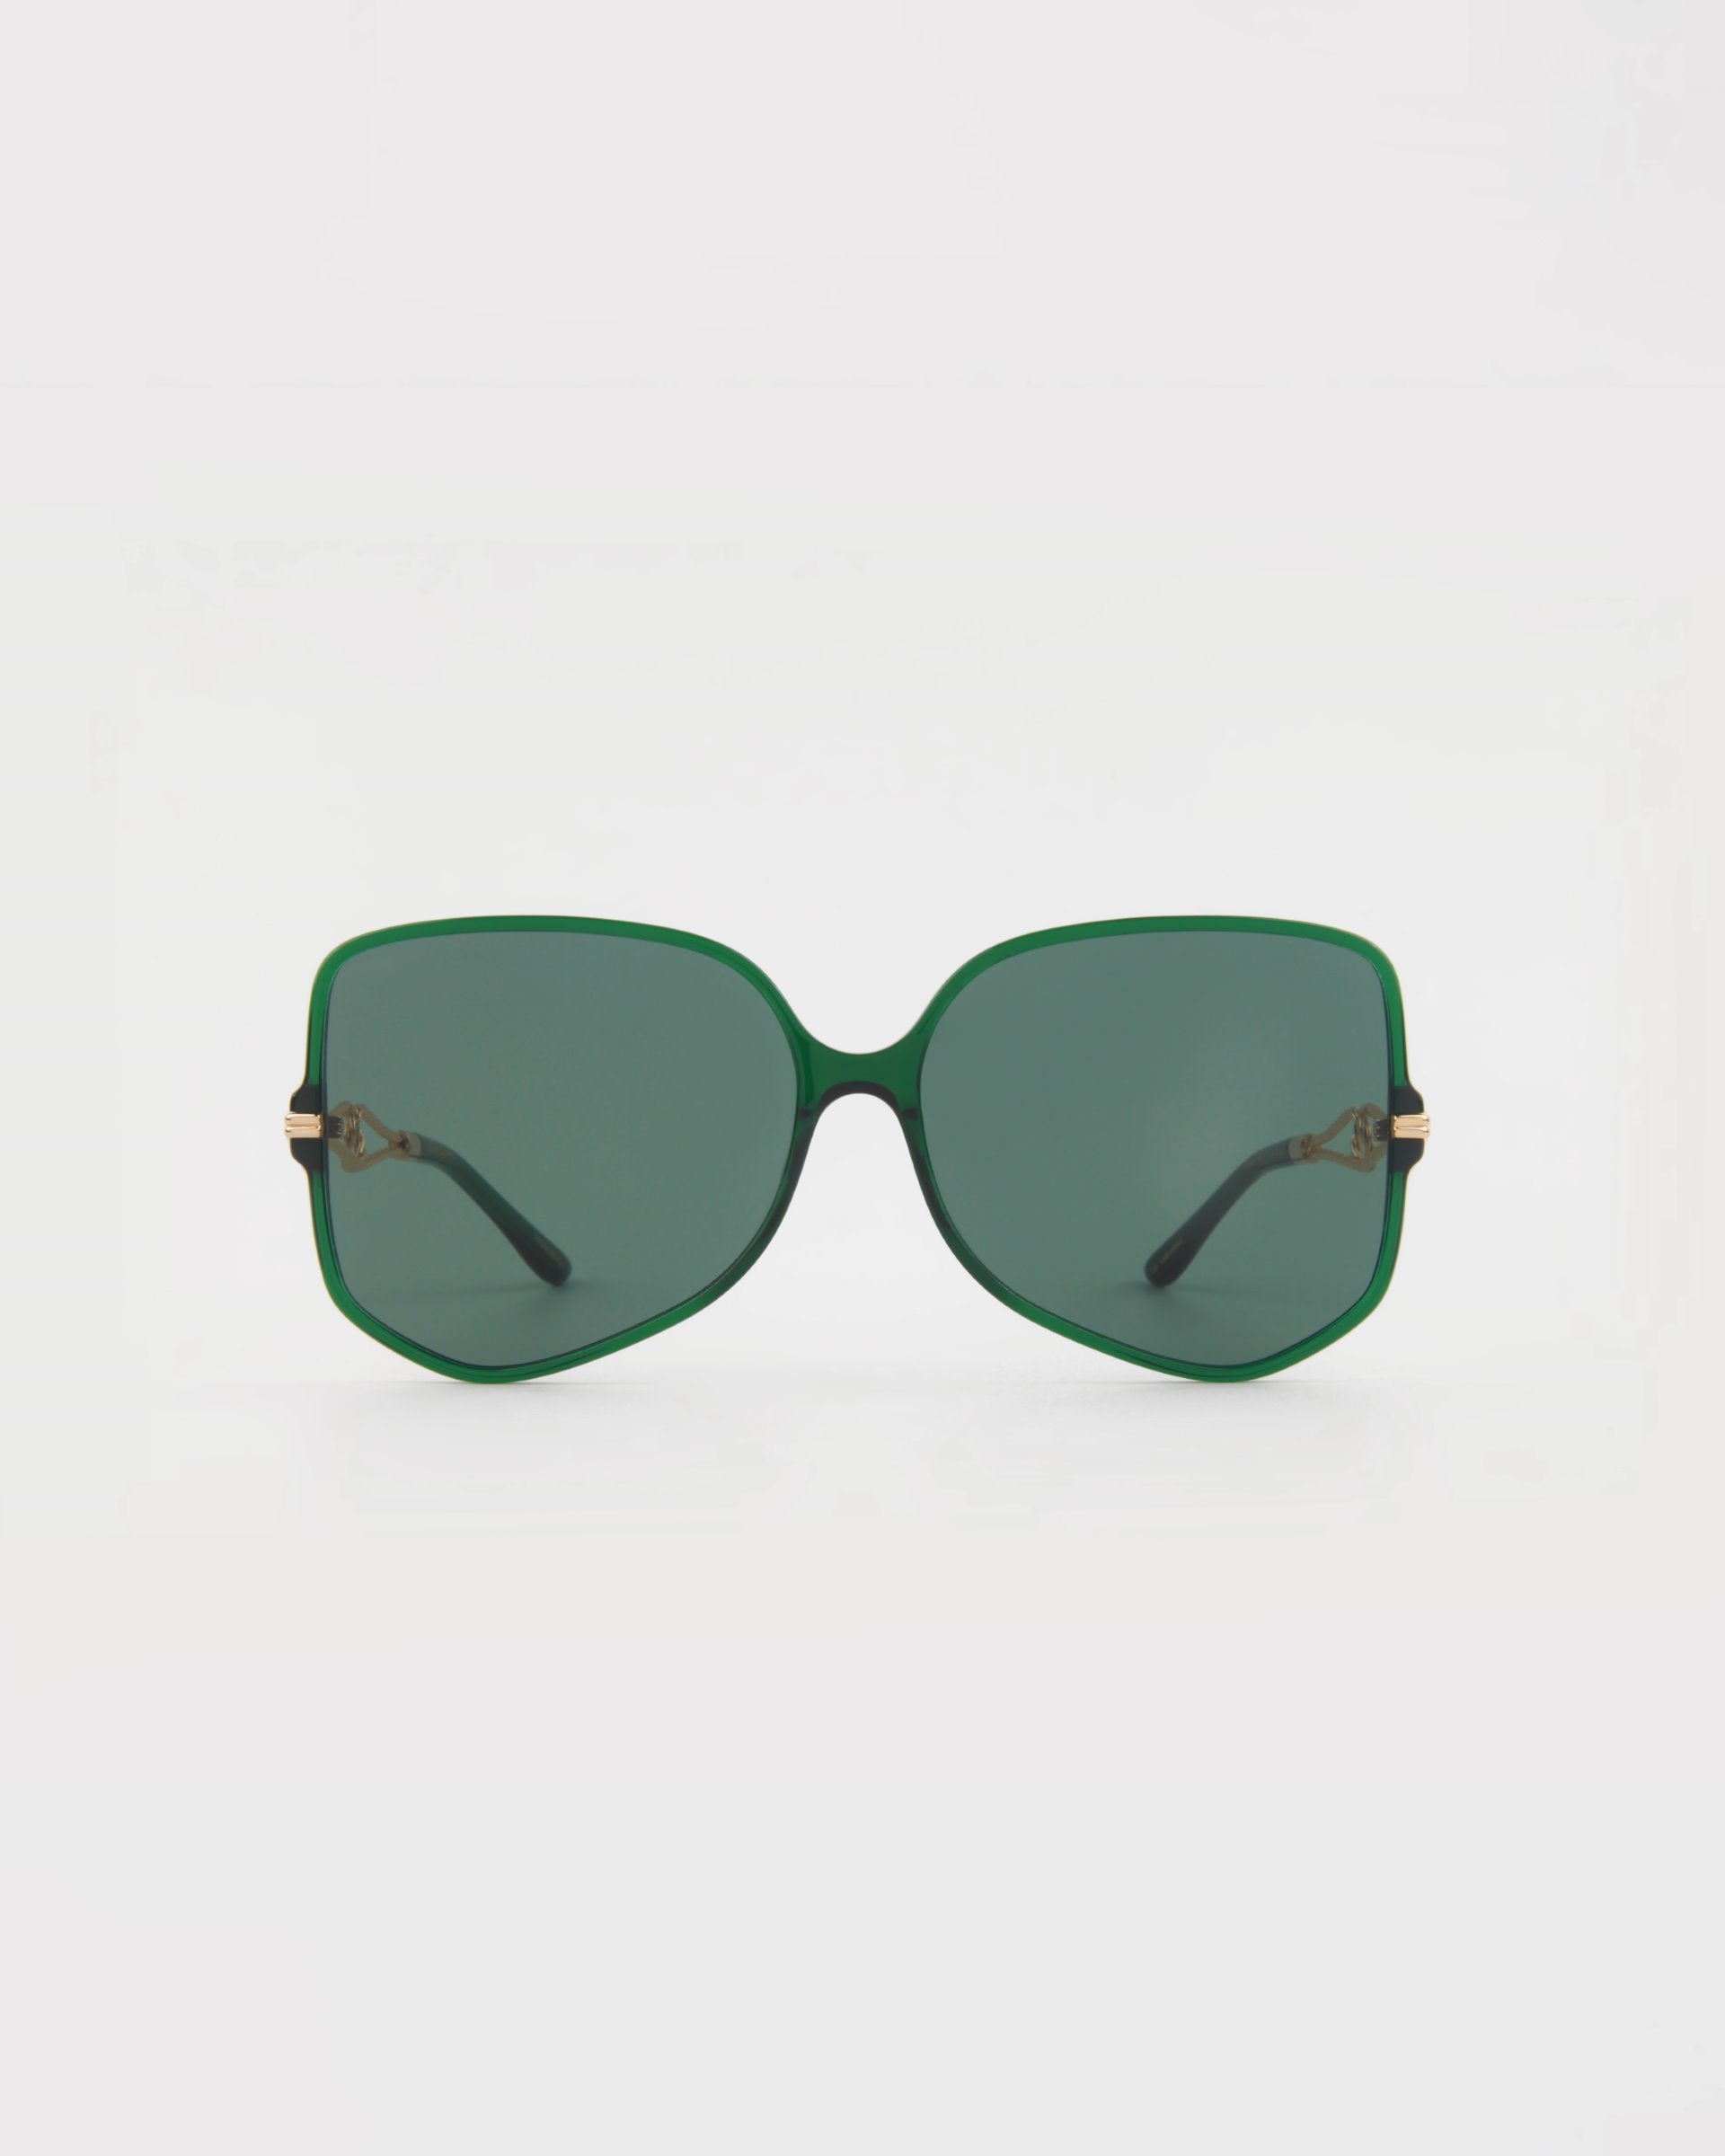 A pair of oversized, square-shaped sunglasses with dark green lenses and handmade acetate green frames is centered on a plain white background. The Voyager sunglasses by For Art&#39;s Sake® have black arms, gold accents on the hinges, and offer UVA &amp; UVB protection.